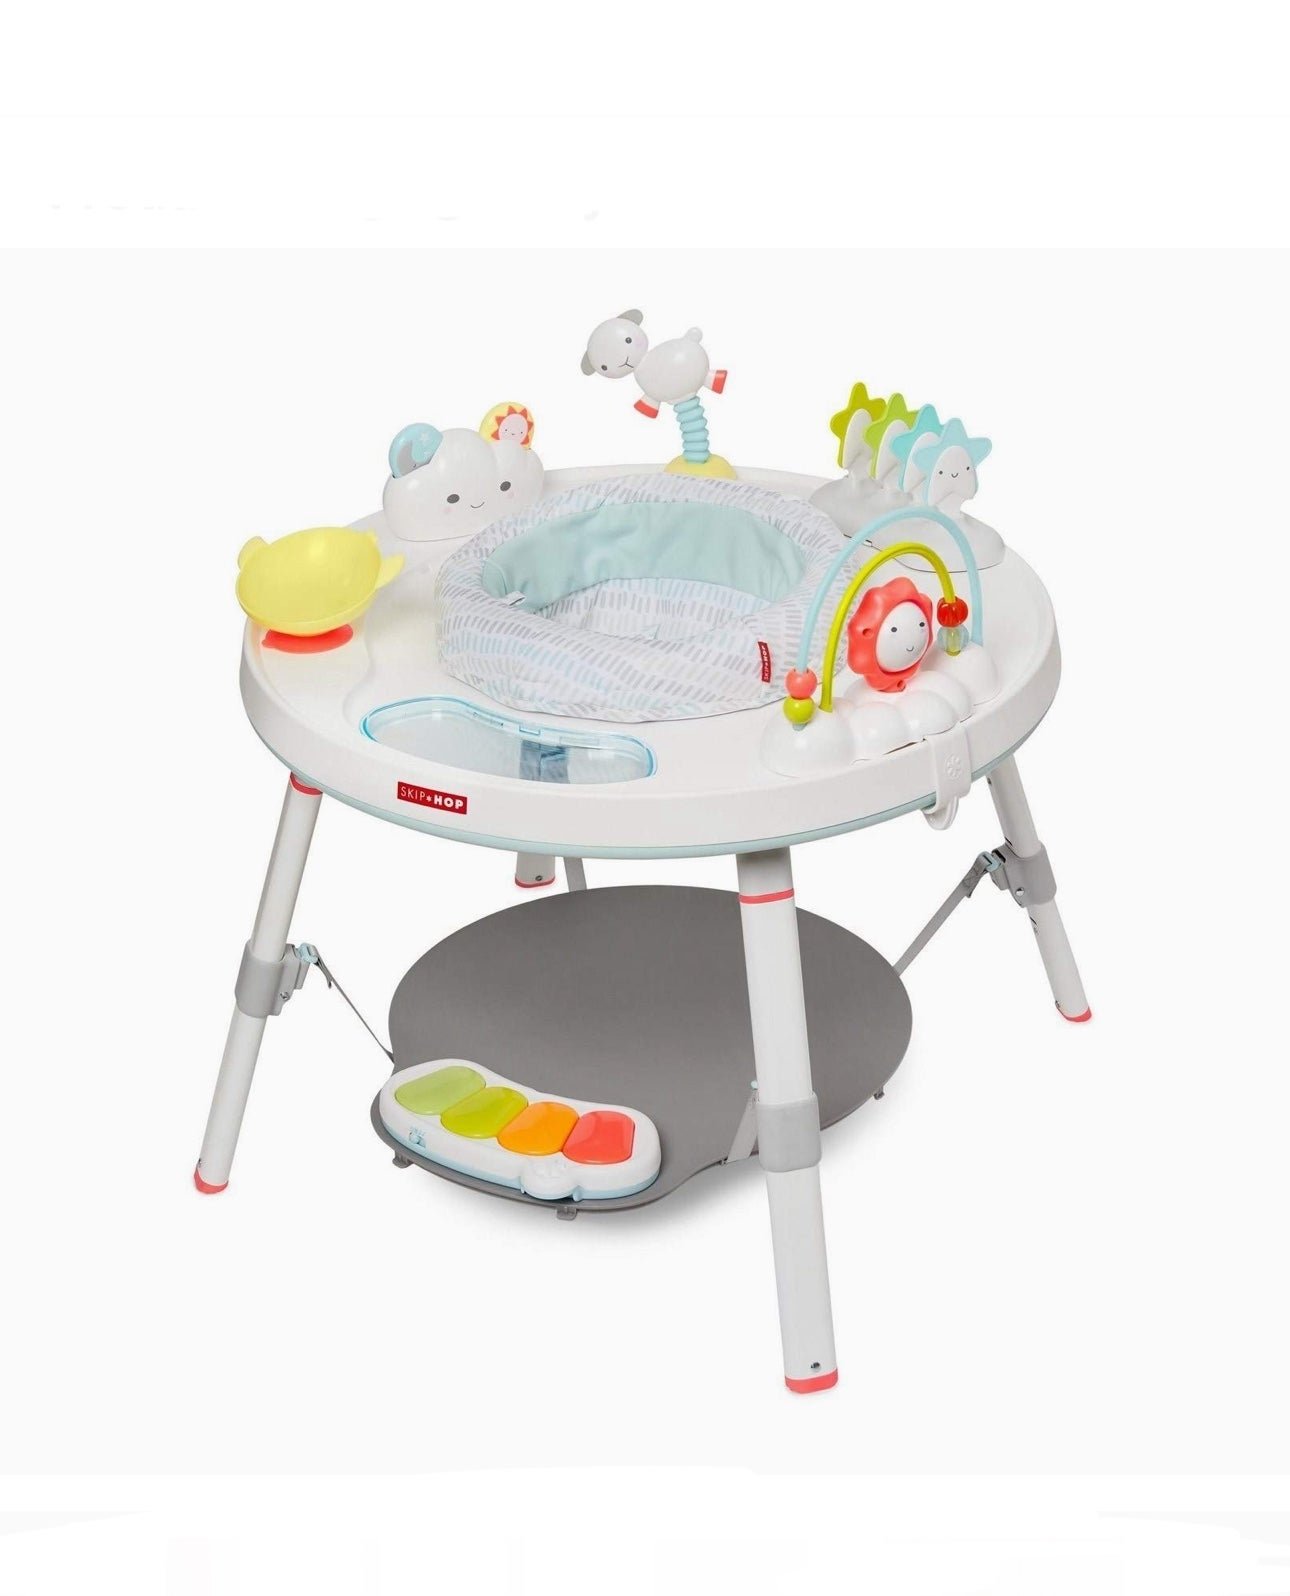 NEW Skip Hop Baby Activity Center: Interactive Play Center, 3-Stage Grow-with-Me n6BaIto3N